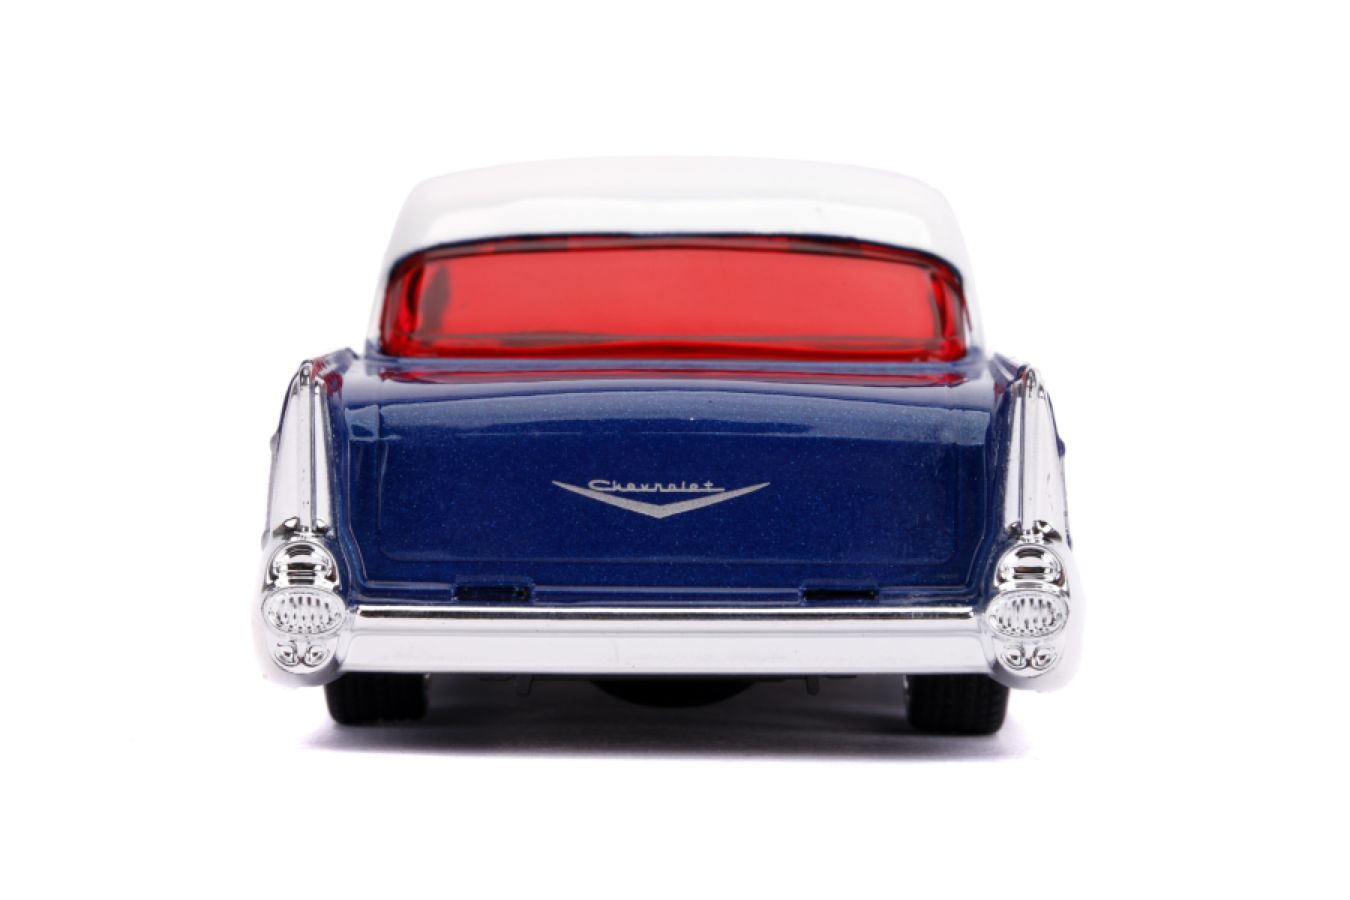 Marvel Comics - Falcon 1957 Chevy Bel-Air 1:32 Scale Hollywood Ride